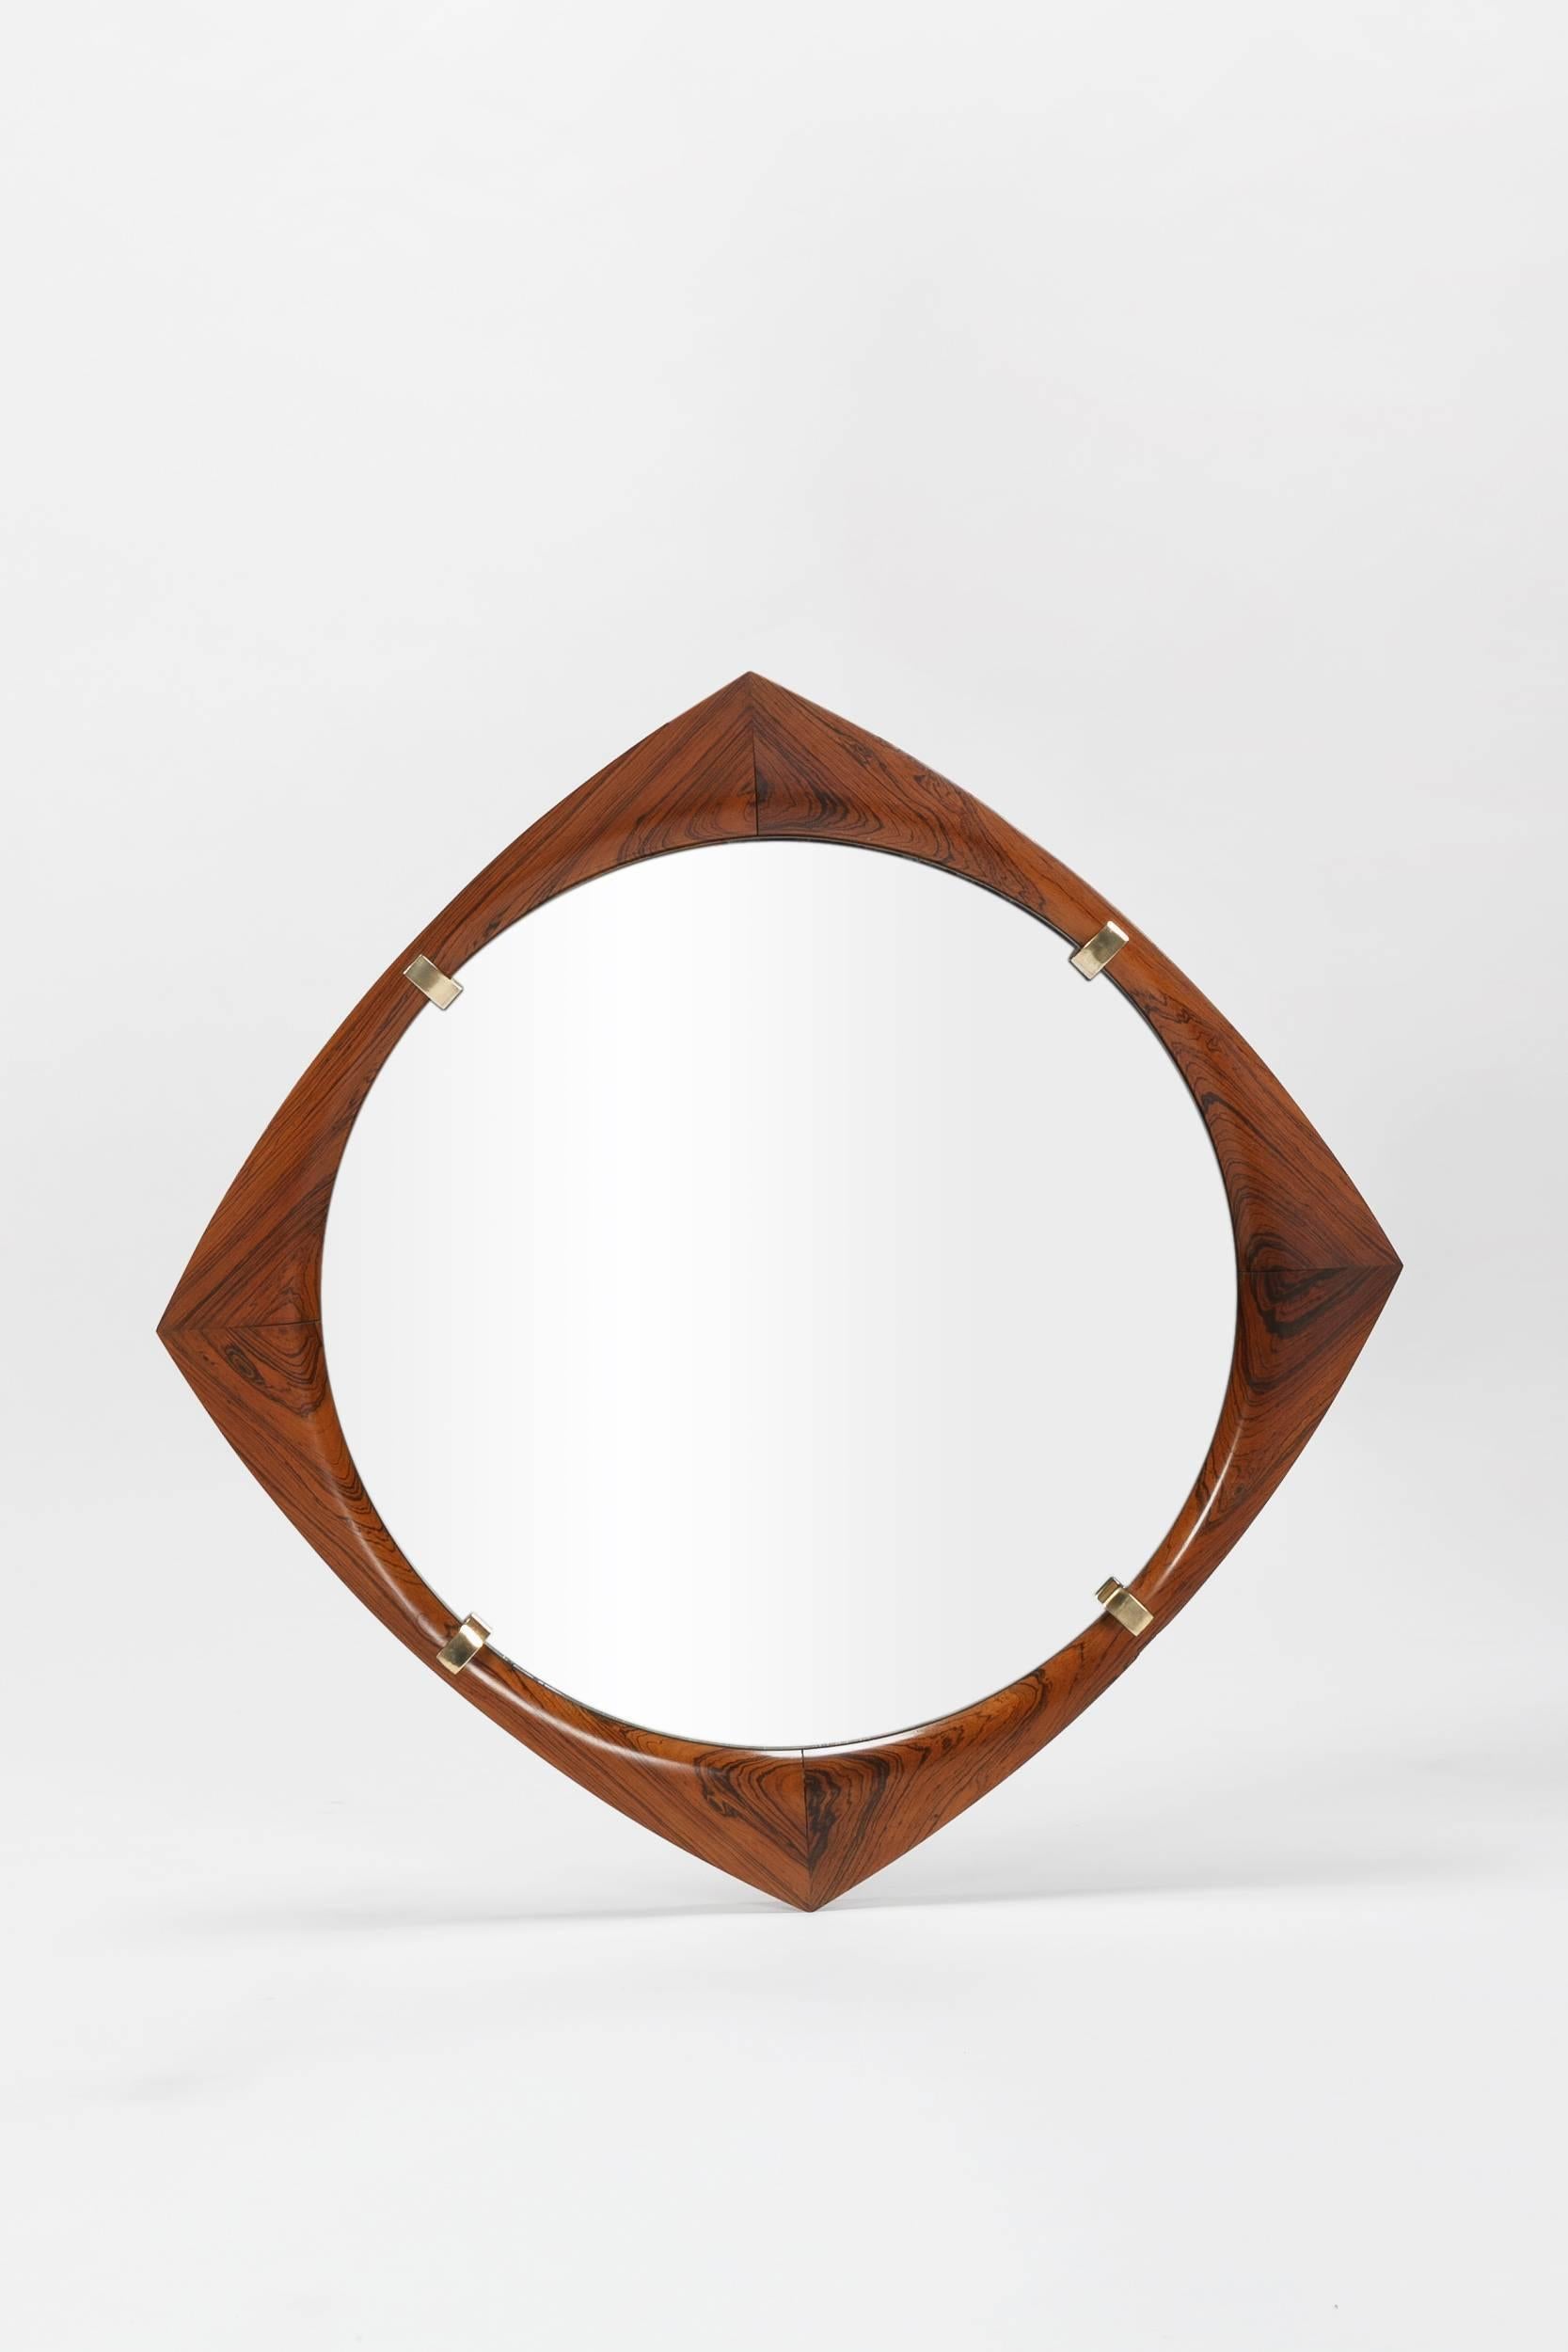 Gorgeous rosewood mirror manufactured in Italy in the 1960s. Awesome workmanship, diamond rosewood with brass fastener and crystal glass. Very high quality custom-made item.